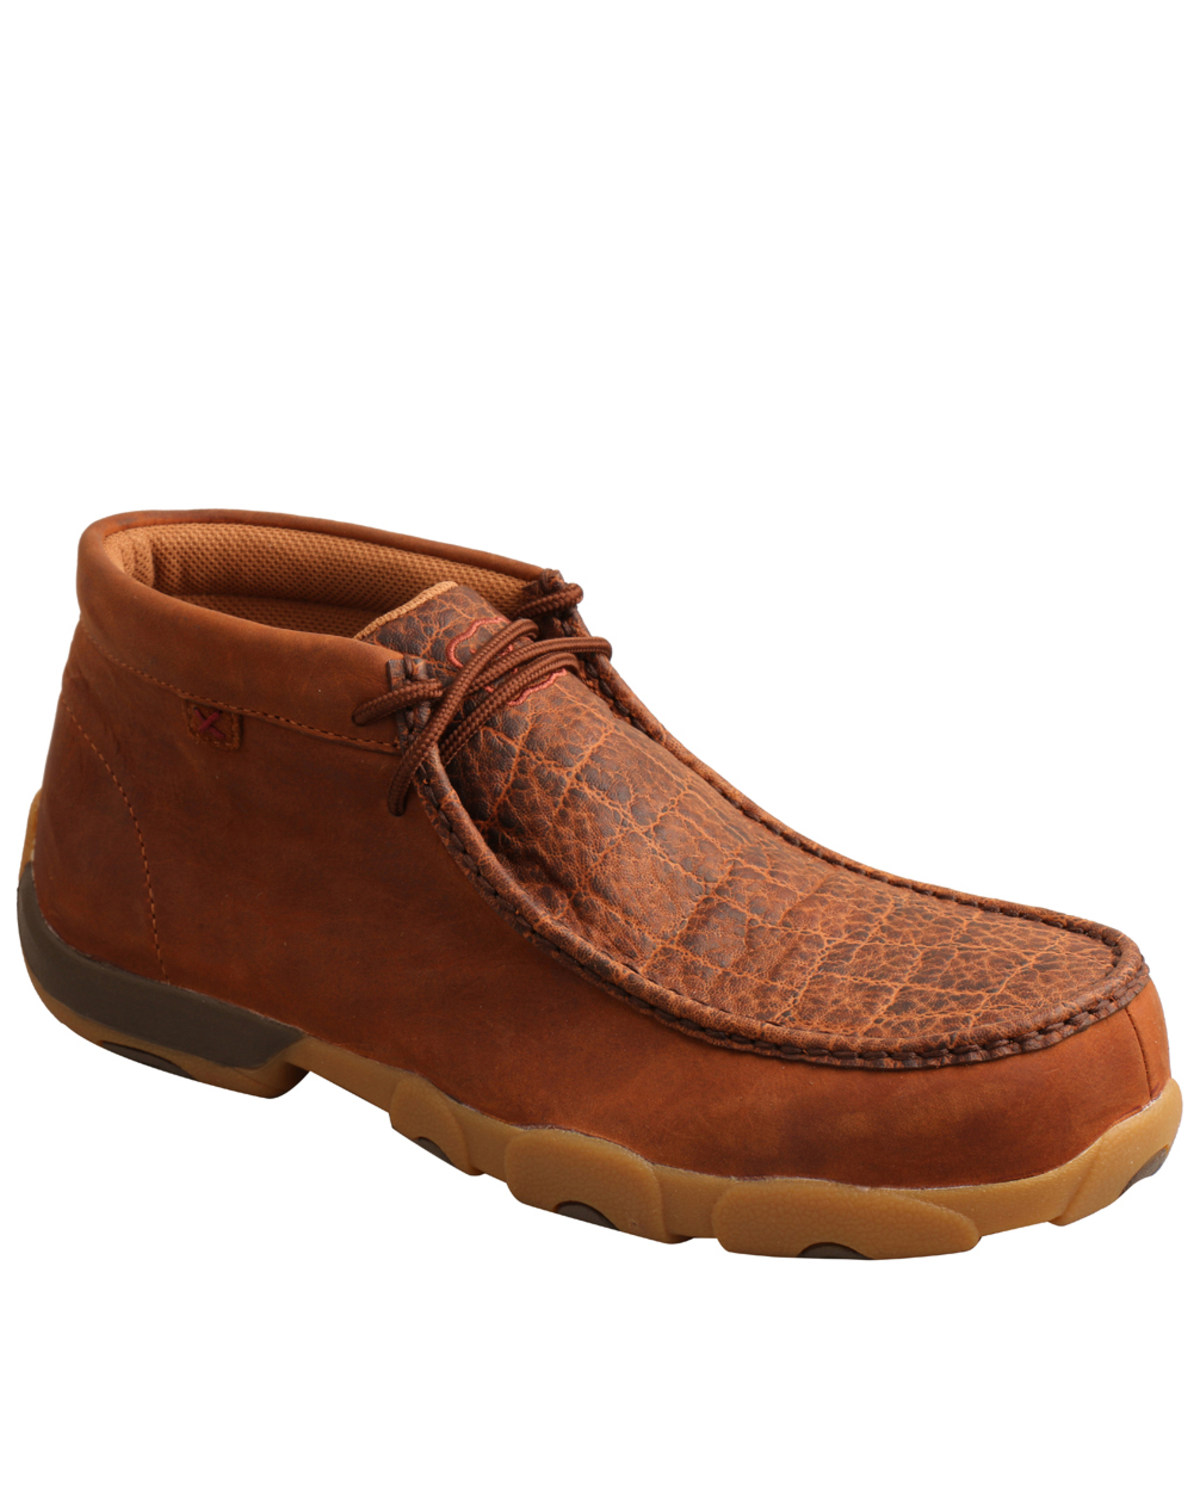 Twisted X Men's Chukka Work Shoes - Composite Toe